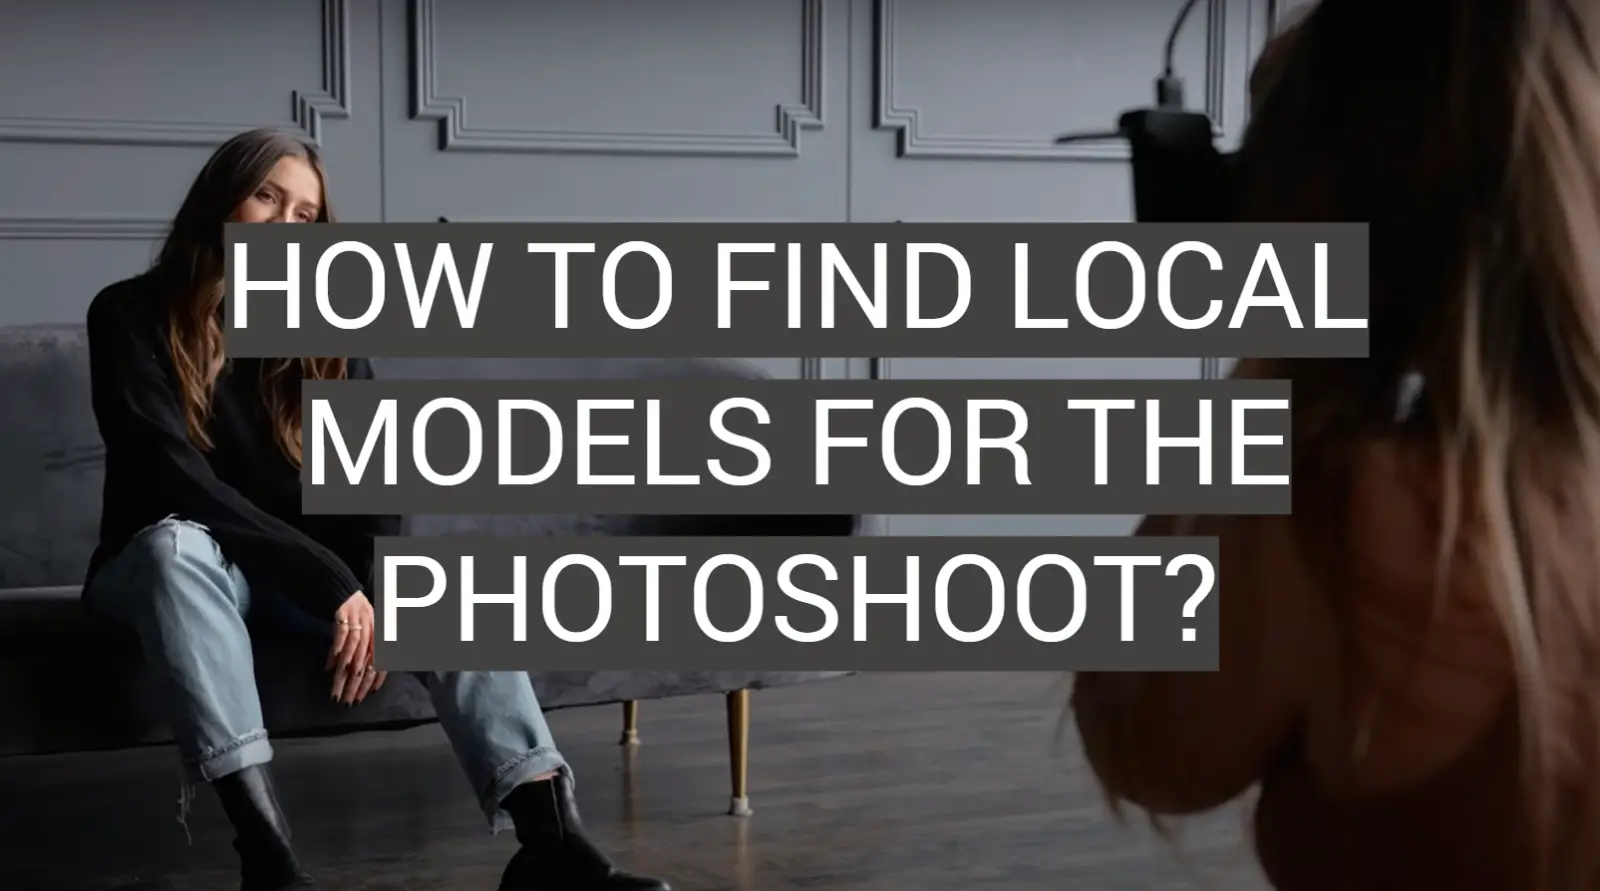 How to Find Local Models For the Photoshoot?